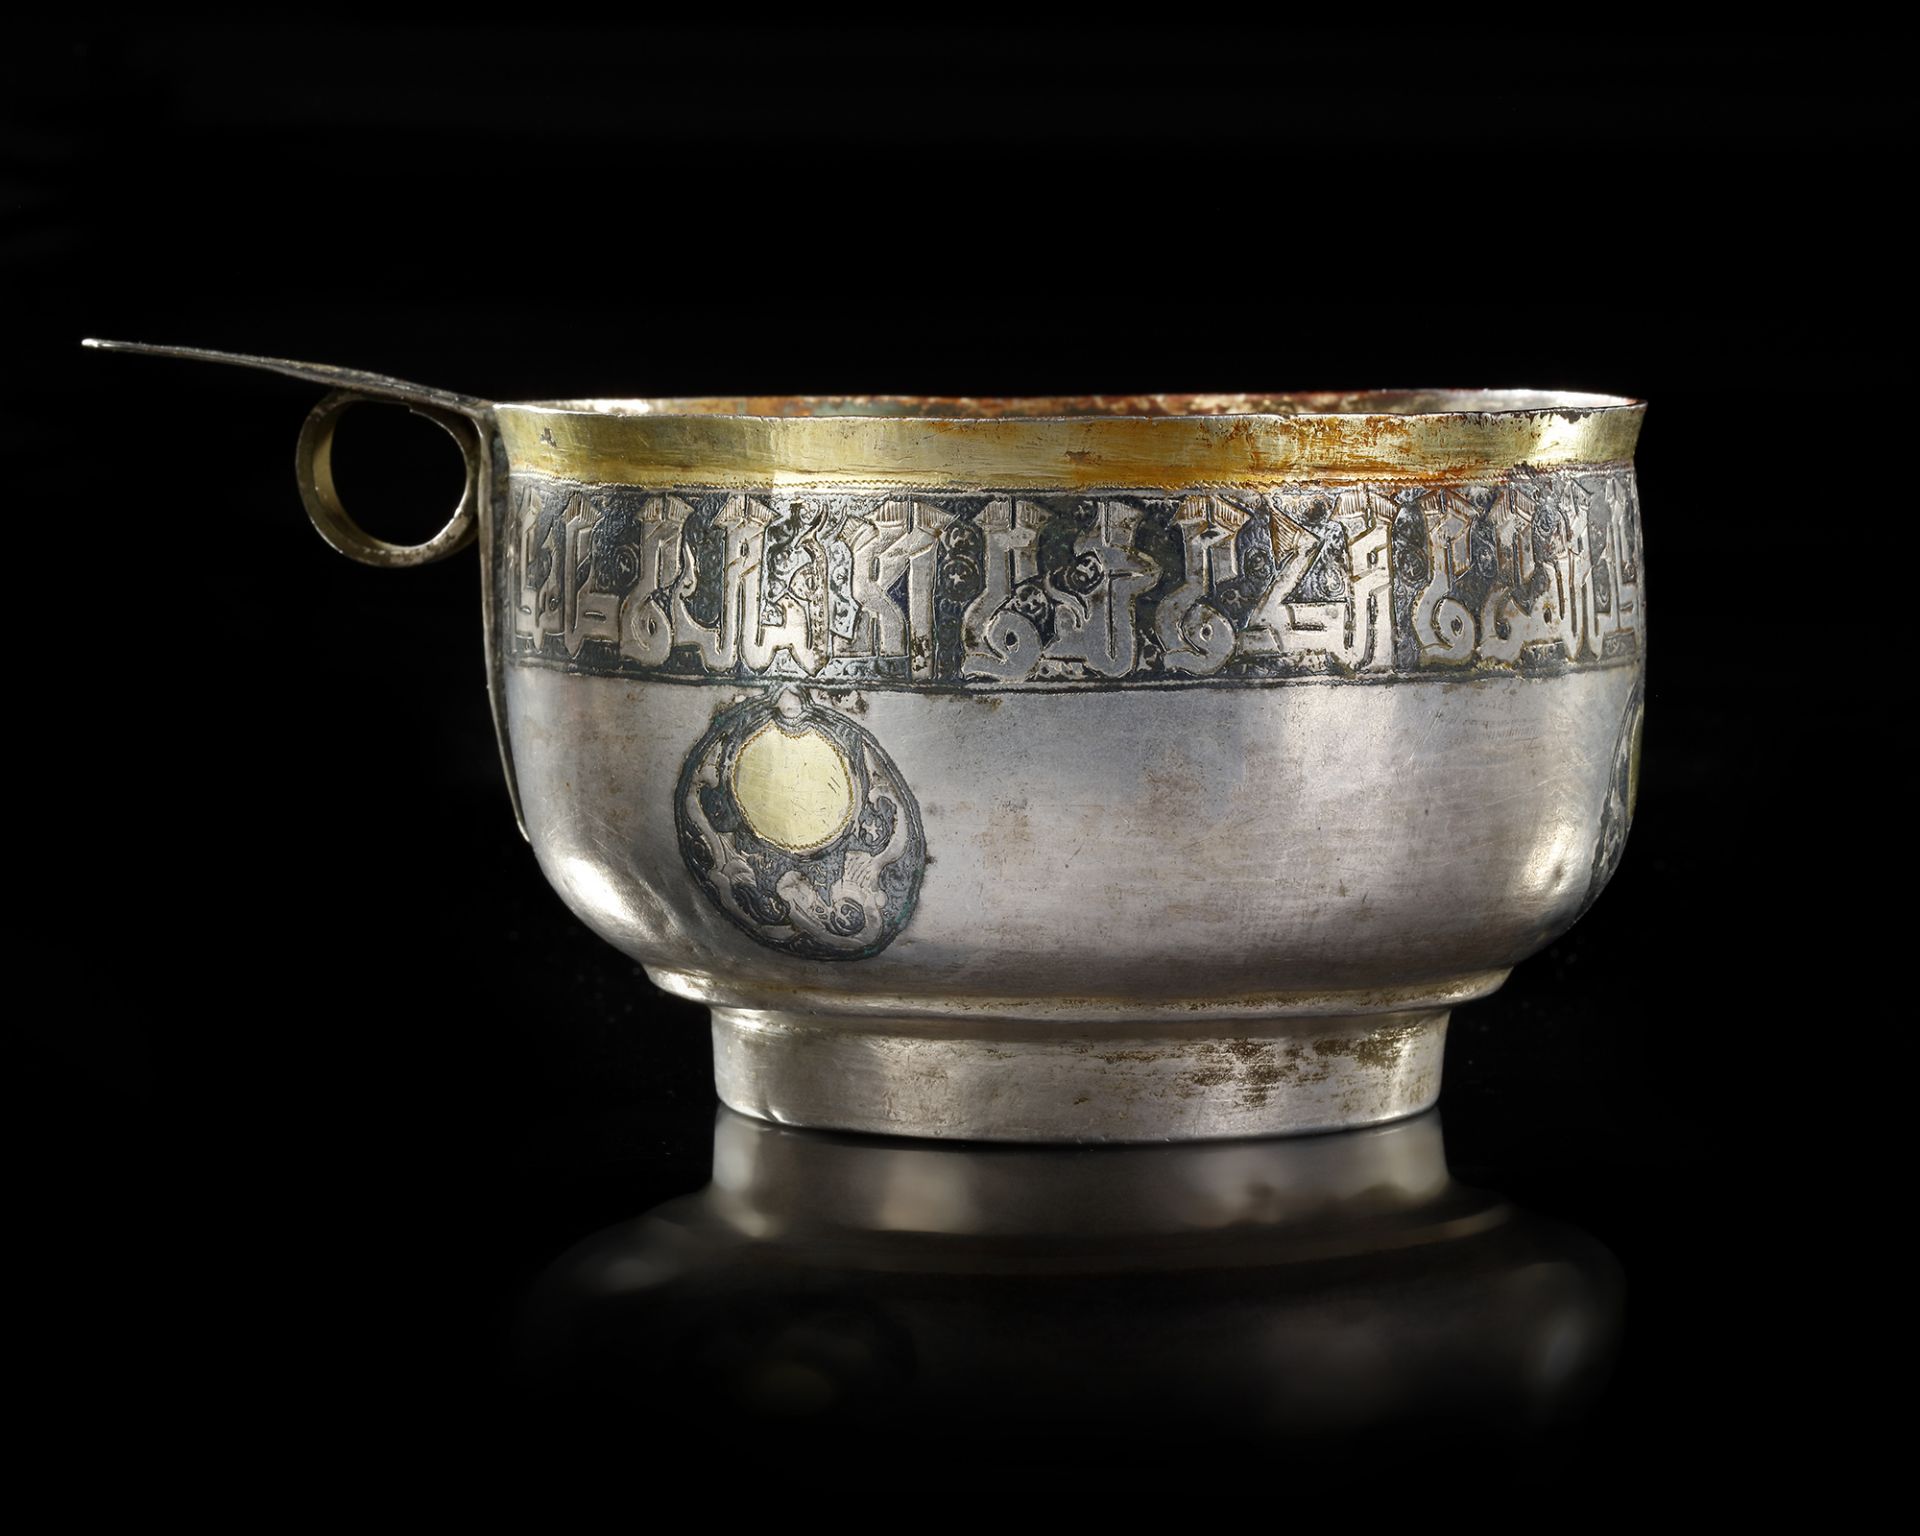 A RARE SILVER AND NIELLOED CUP WITH KUFIC INSCRIPTION, PERSIA OR CENTRAL ASIA, 11TH-12TH CENTURY - Image 12 of 34